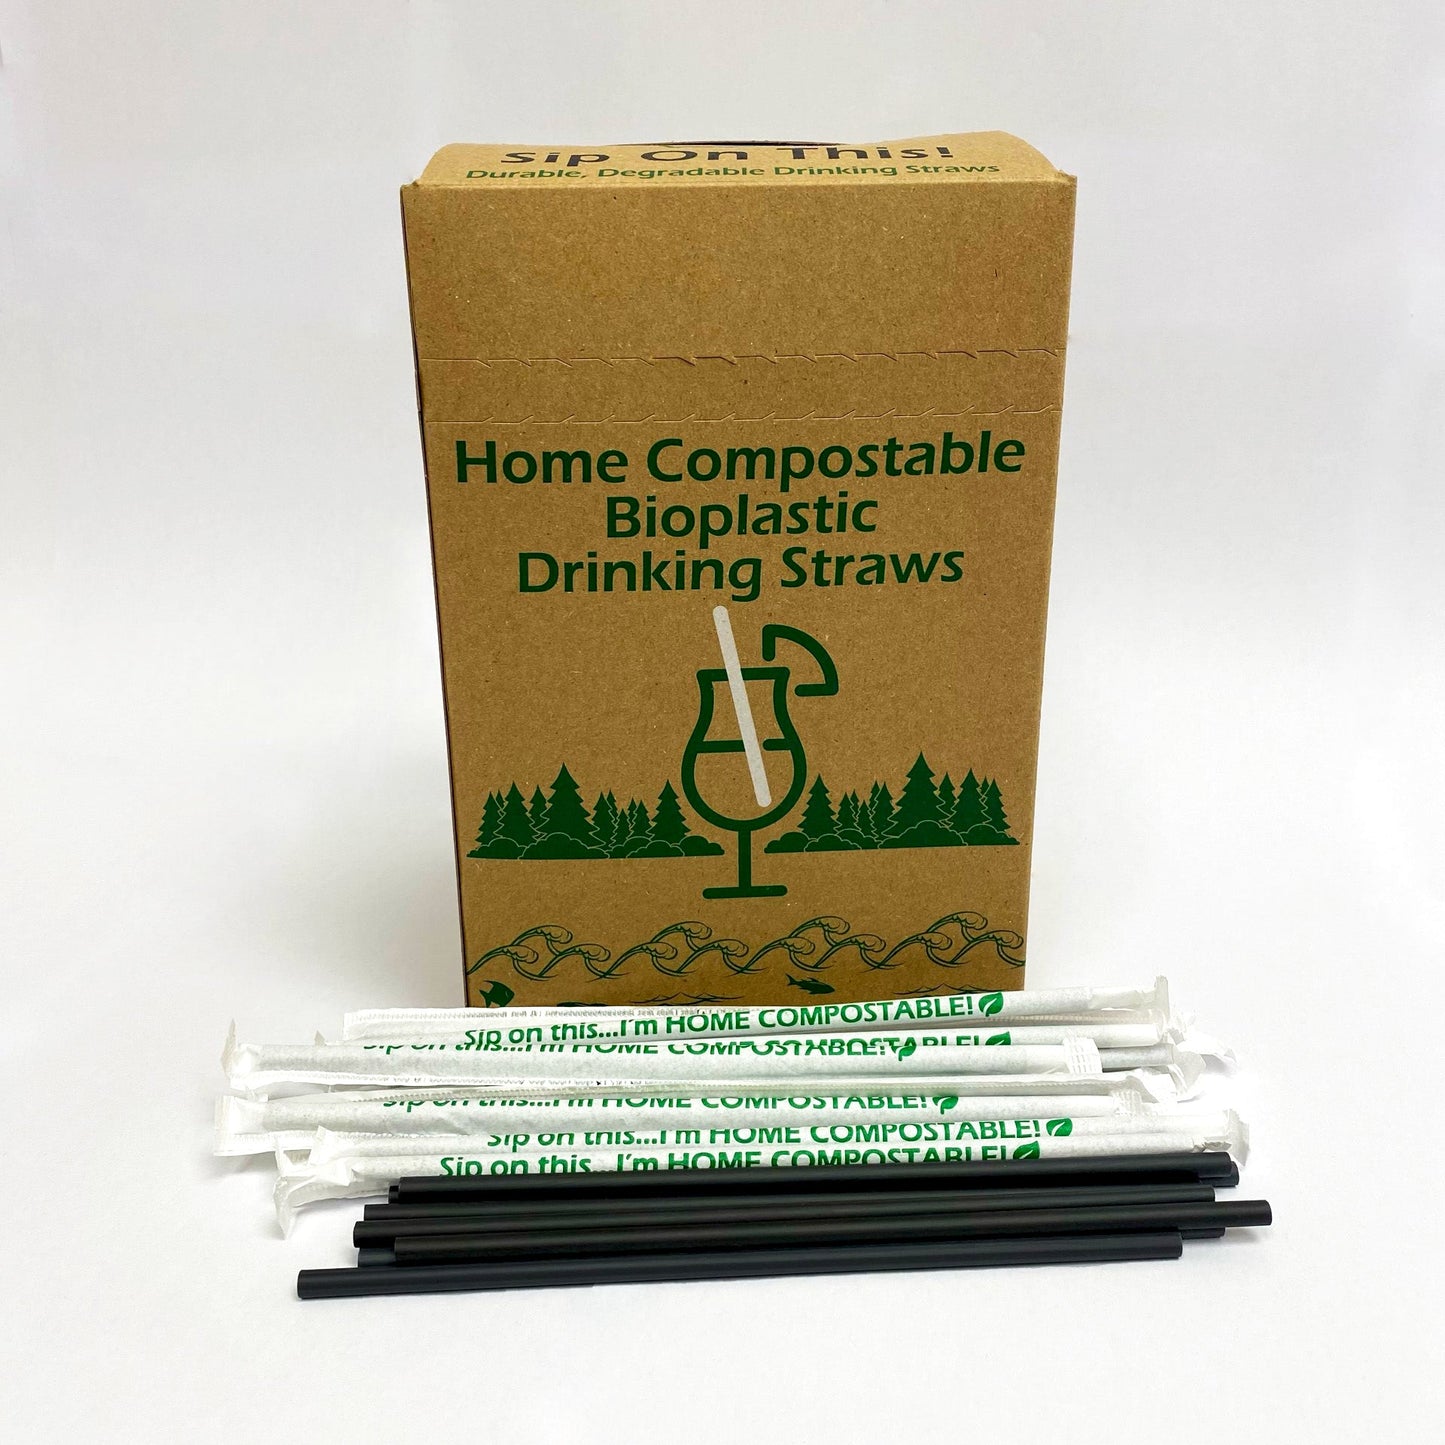 BLACK 7.75" x 5.5mm Compostable Drinking Straw (2800-count)